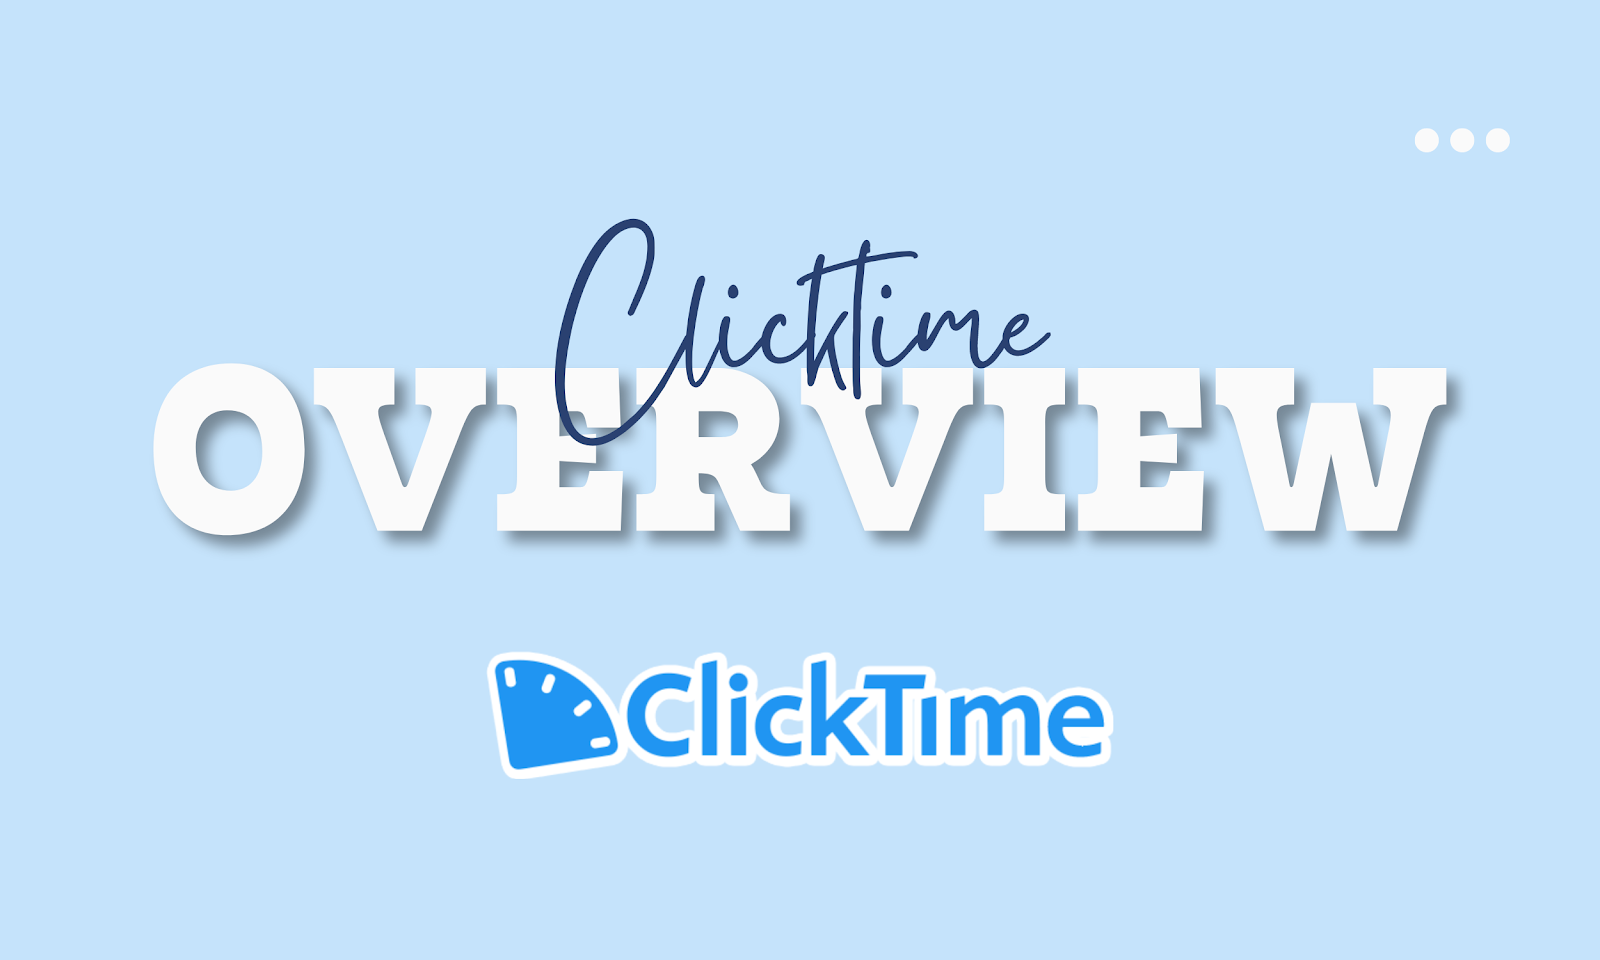 Clicktime Overview